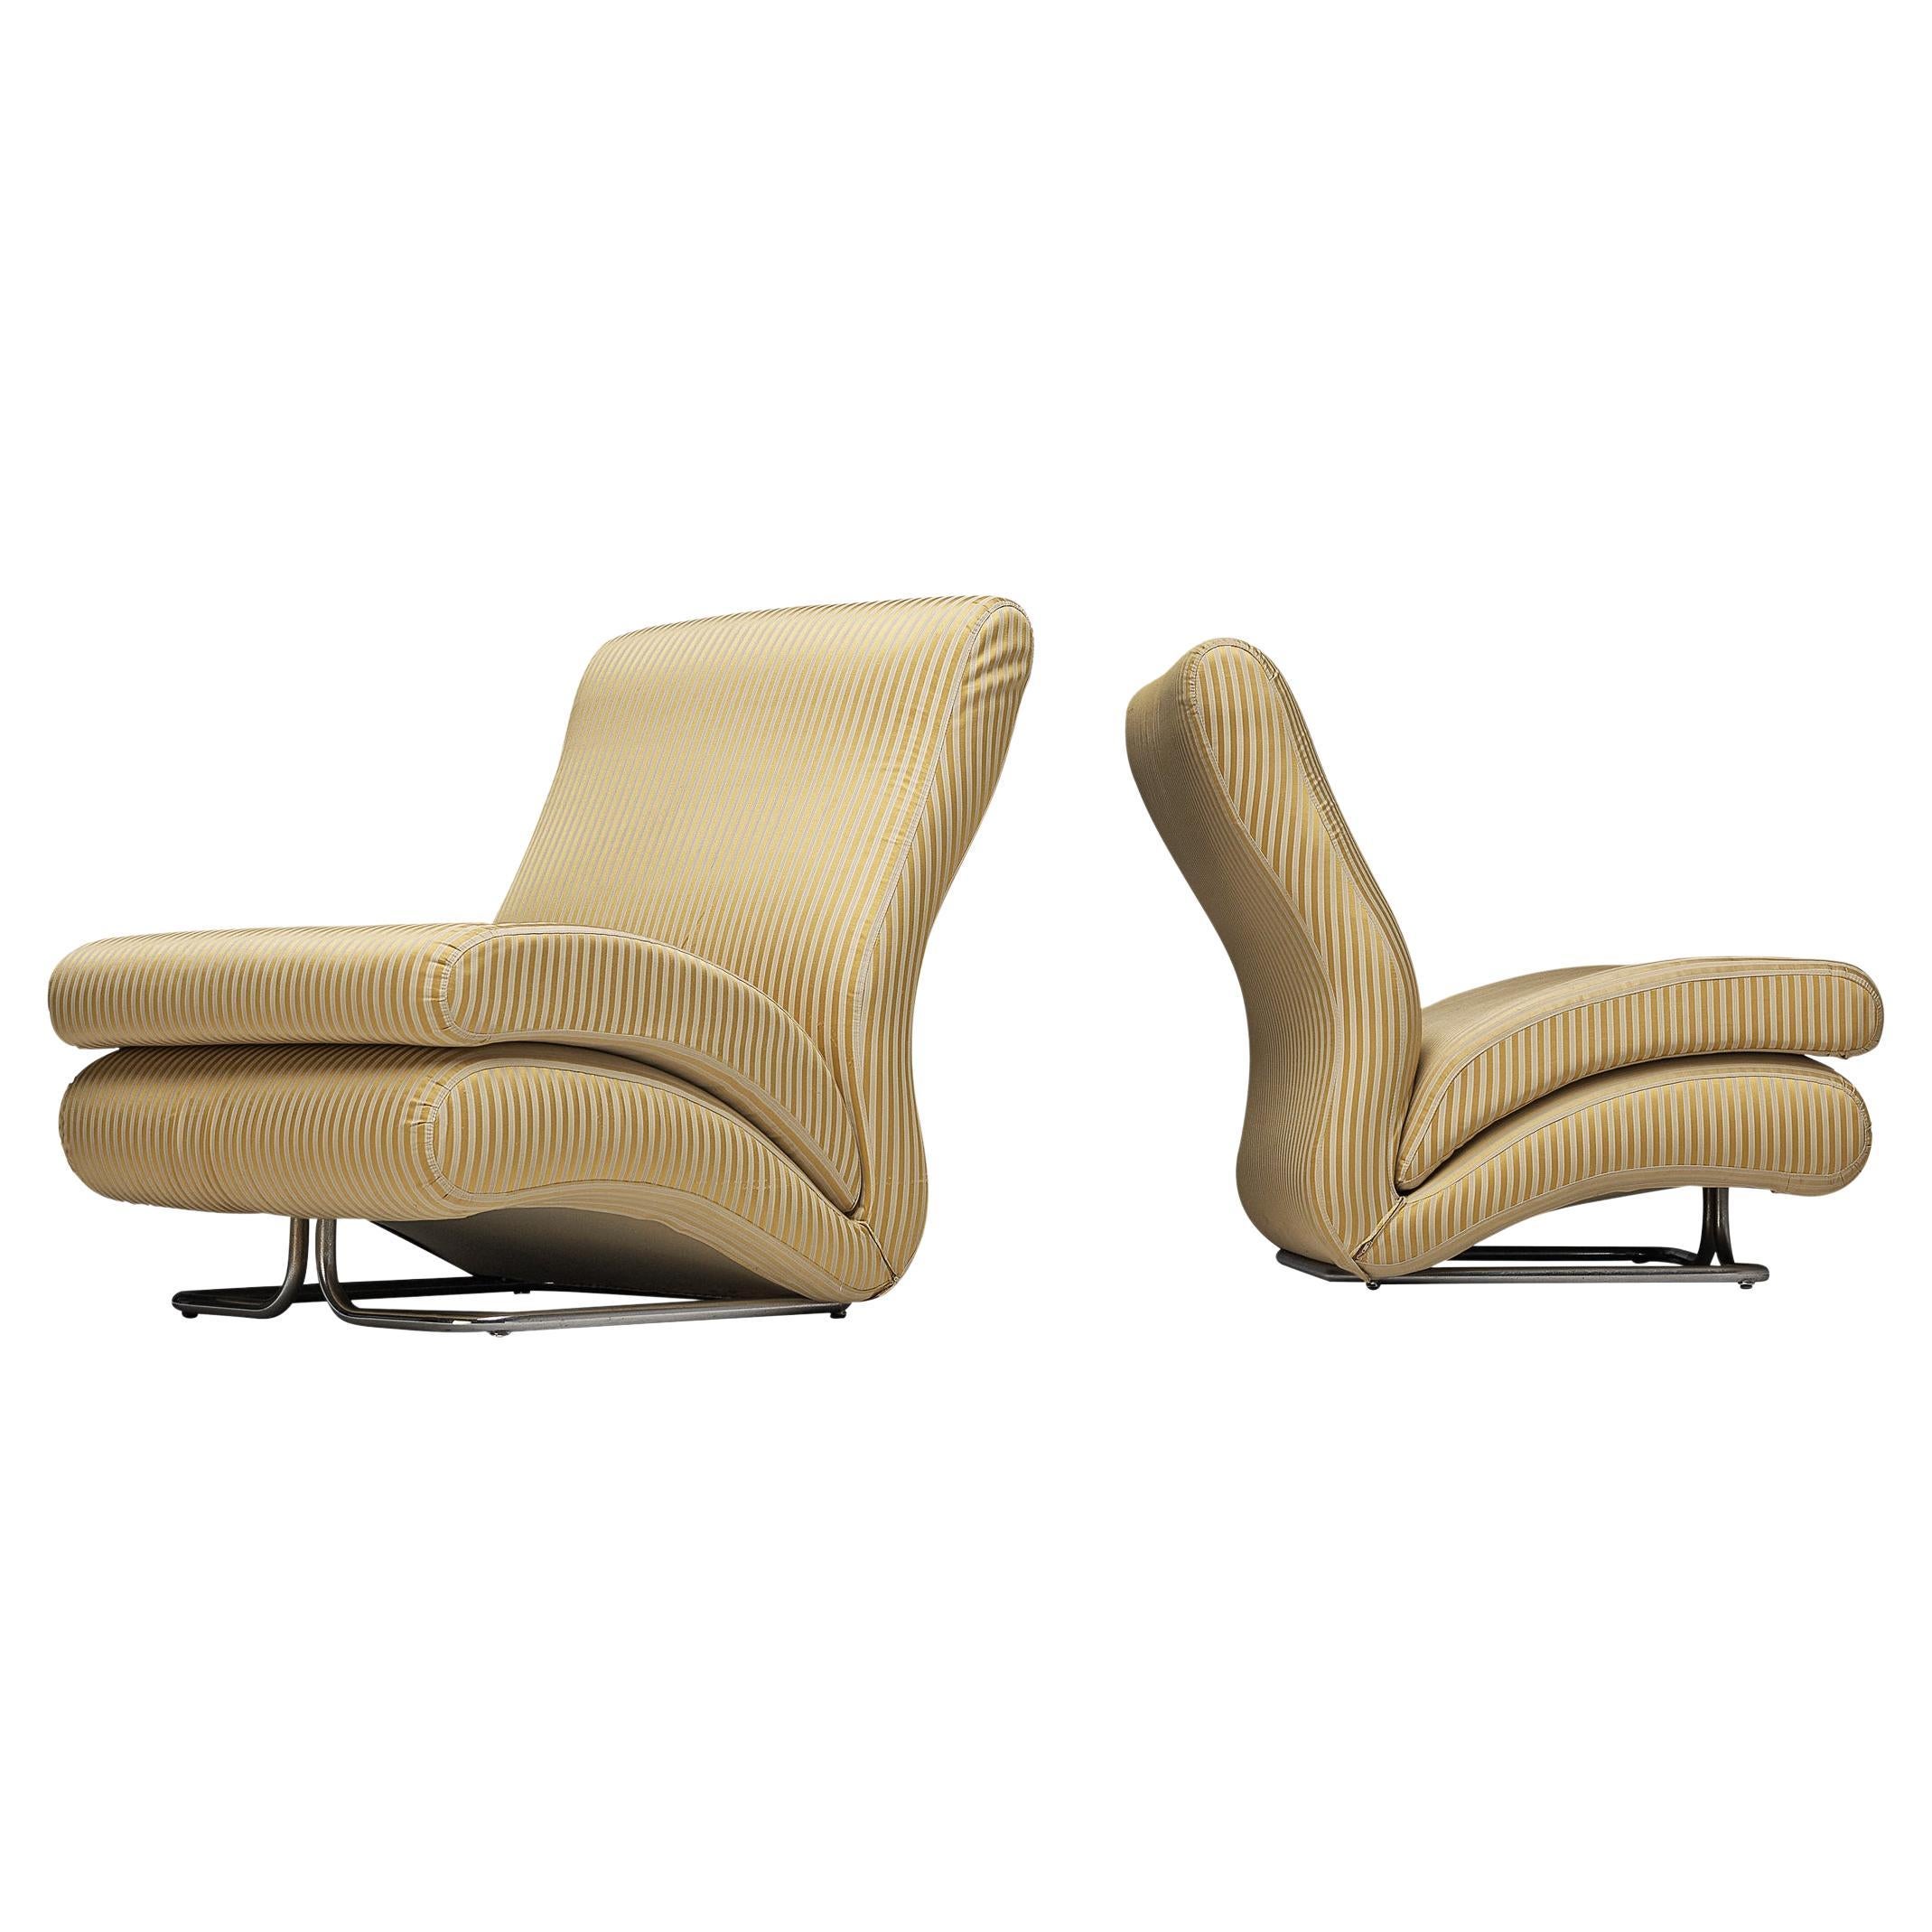 Vittorio Varo for I.P.E. 'Cigno' Lounge Chairs in Striped Upholstery  For Sale